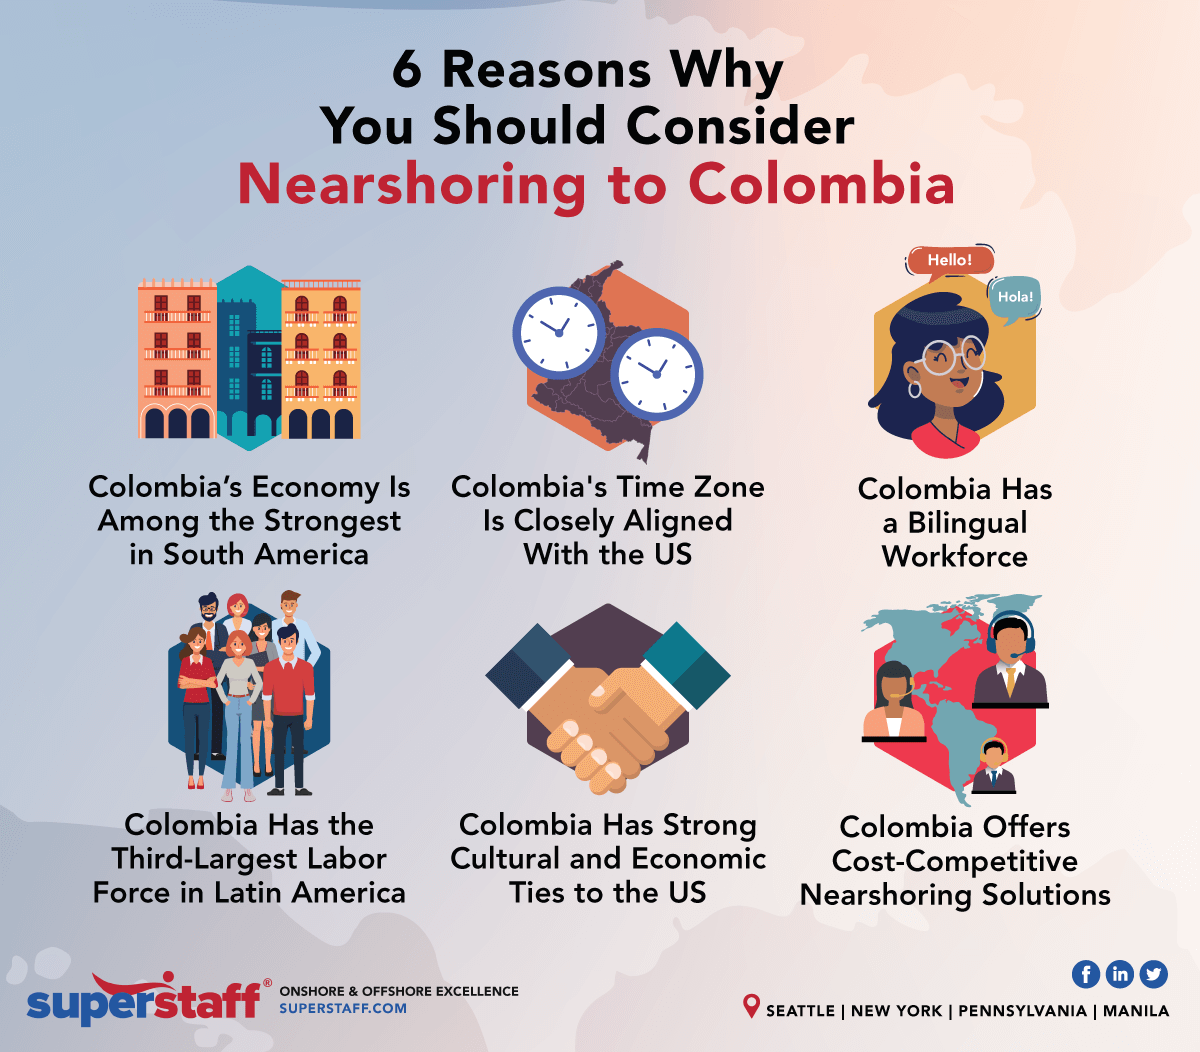 6 Reasons Why You Should Consider Nearshoring to Columbia